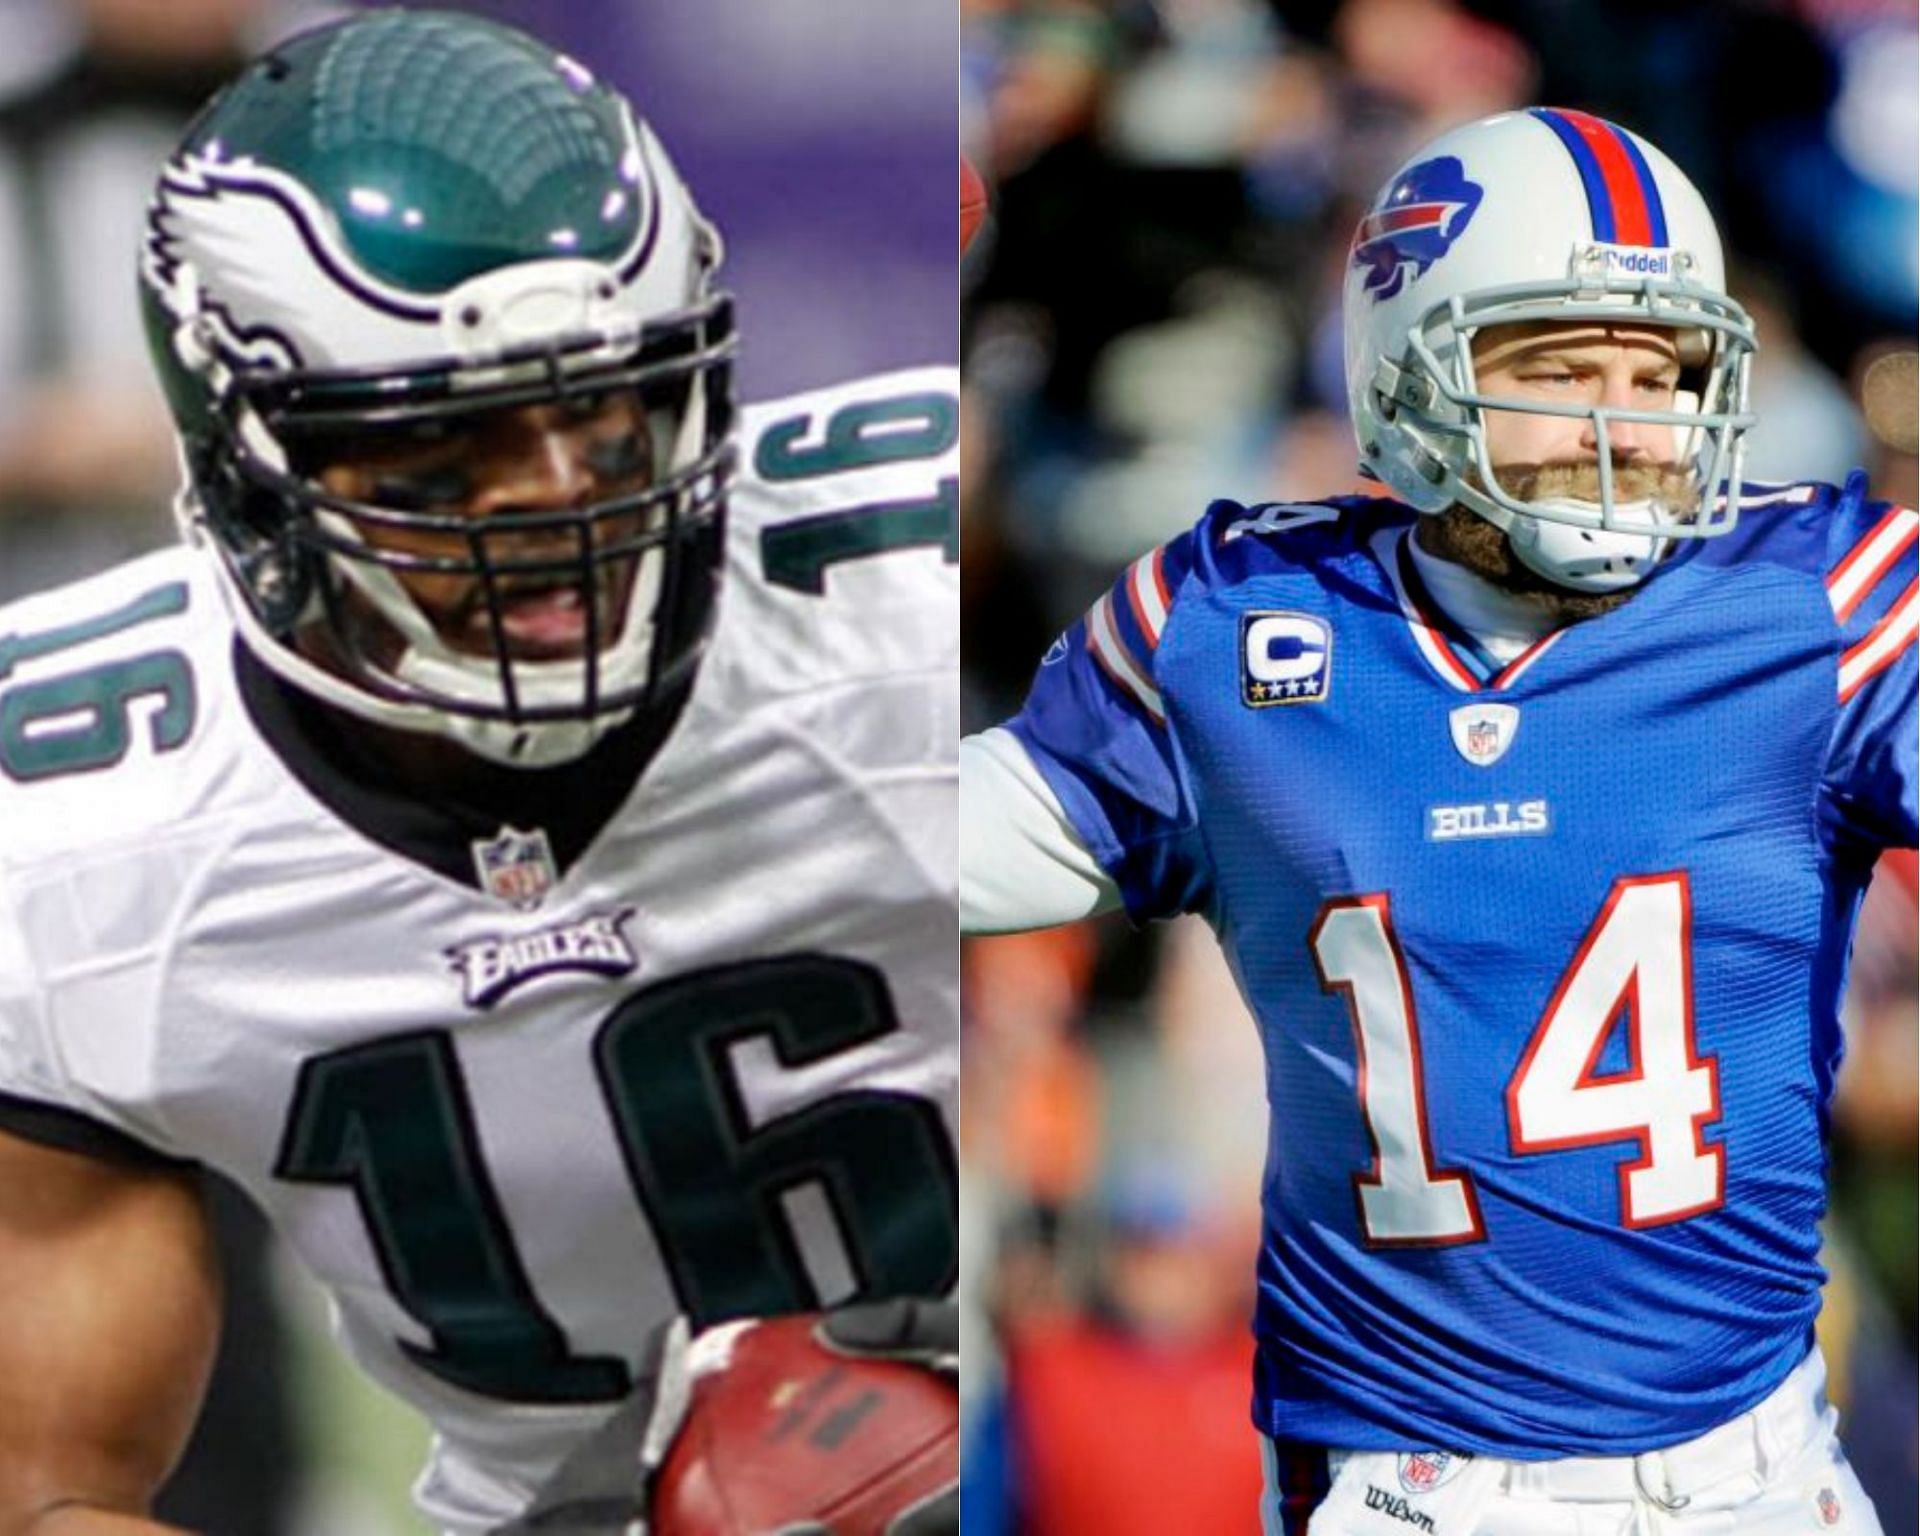 Which NFL stars have suited up for Bills and Jets? NFL Immaculate Grid answers for July 21  